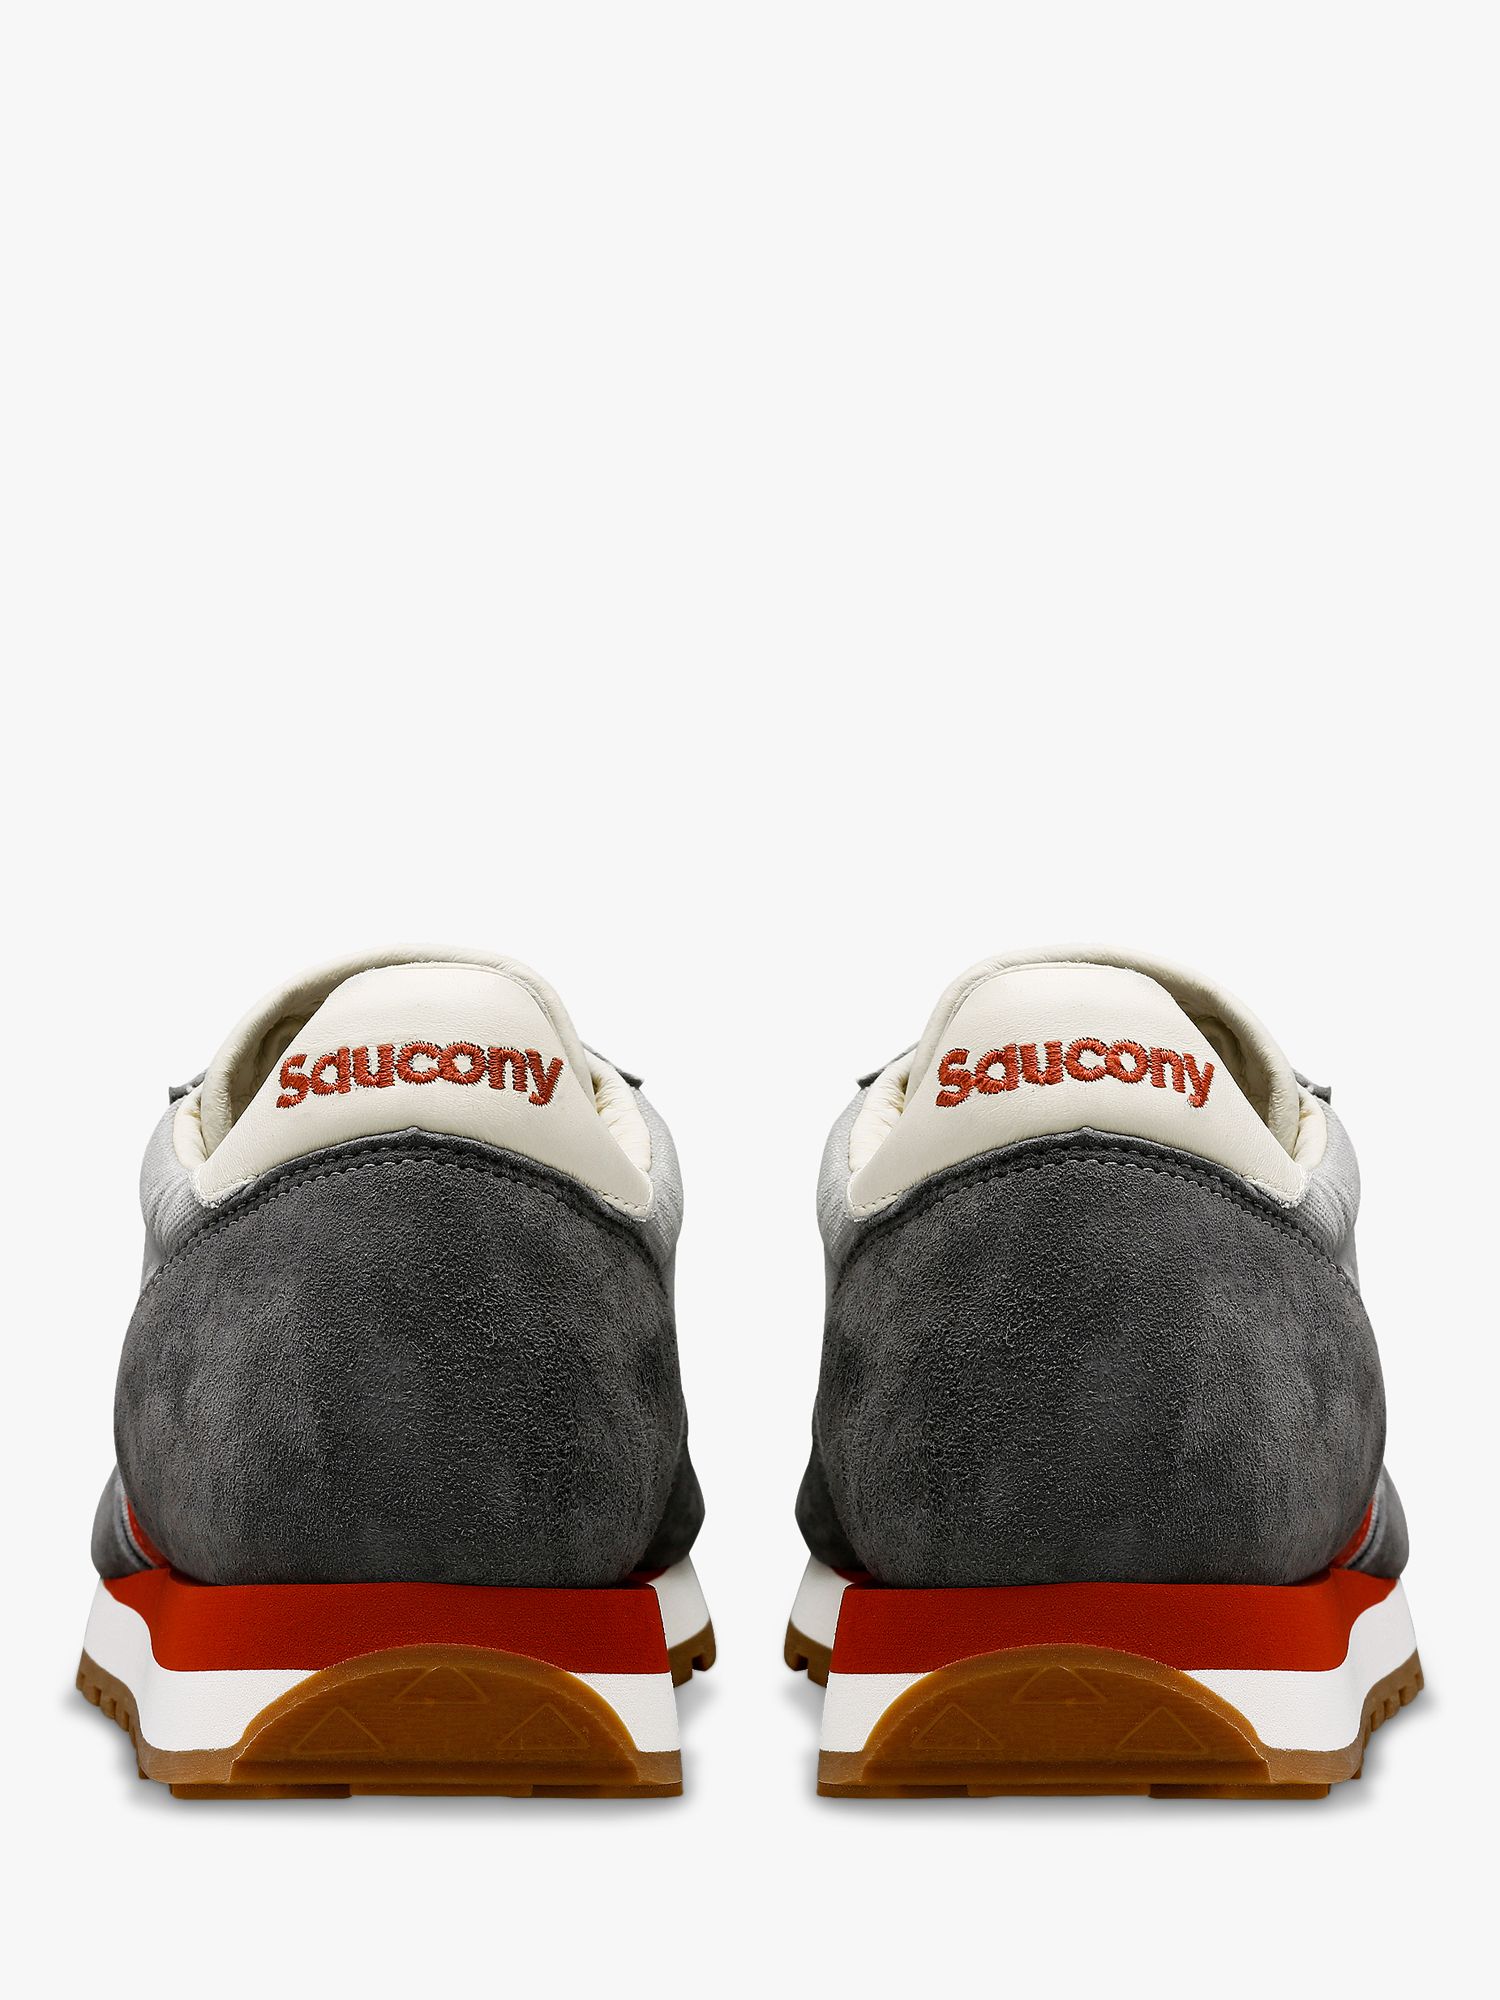 Saucony Jazz Original Lace Up Trainers, Grey/Red at John Lewis